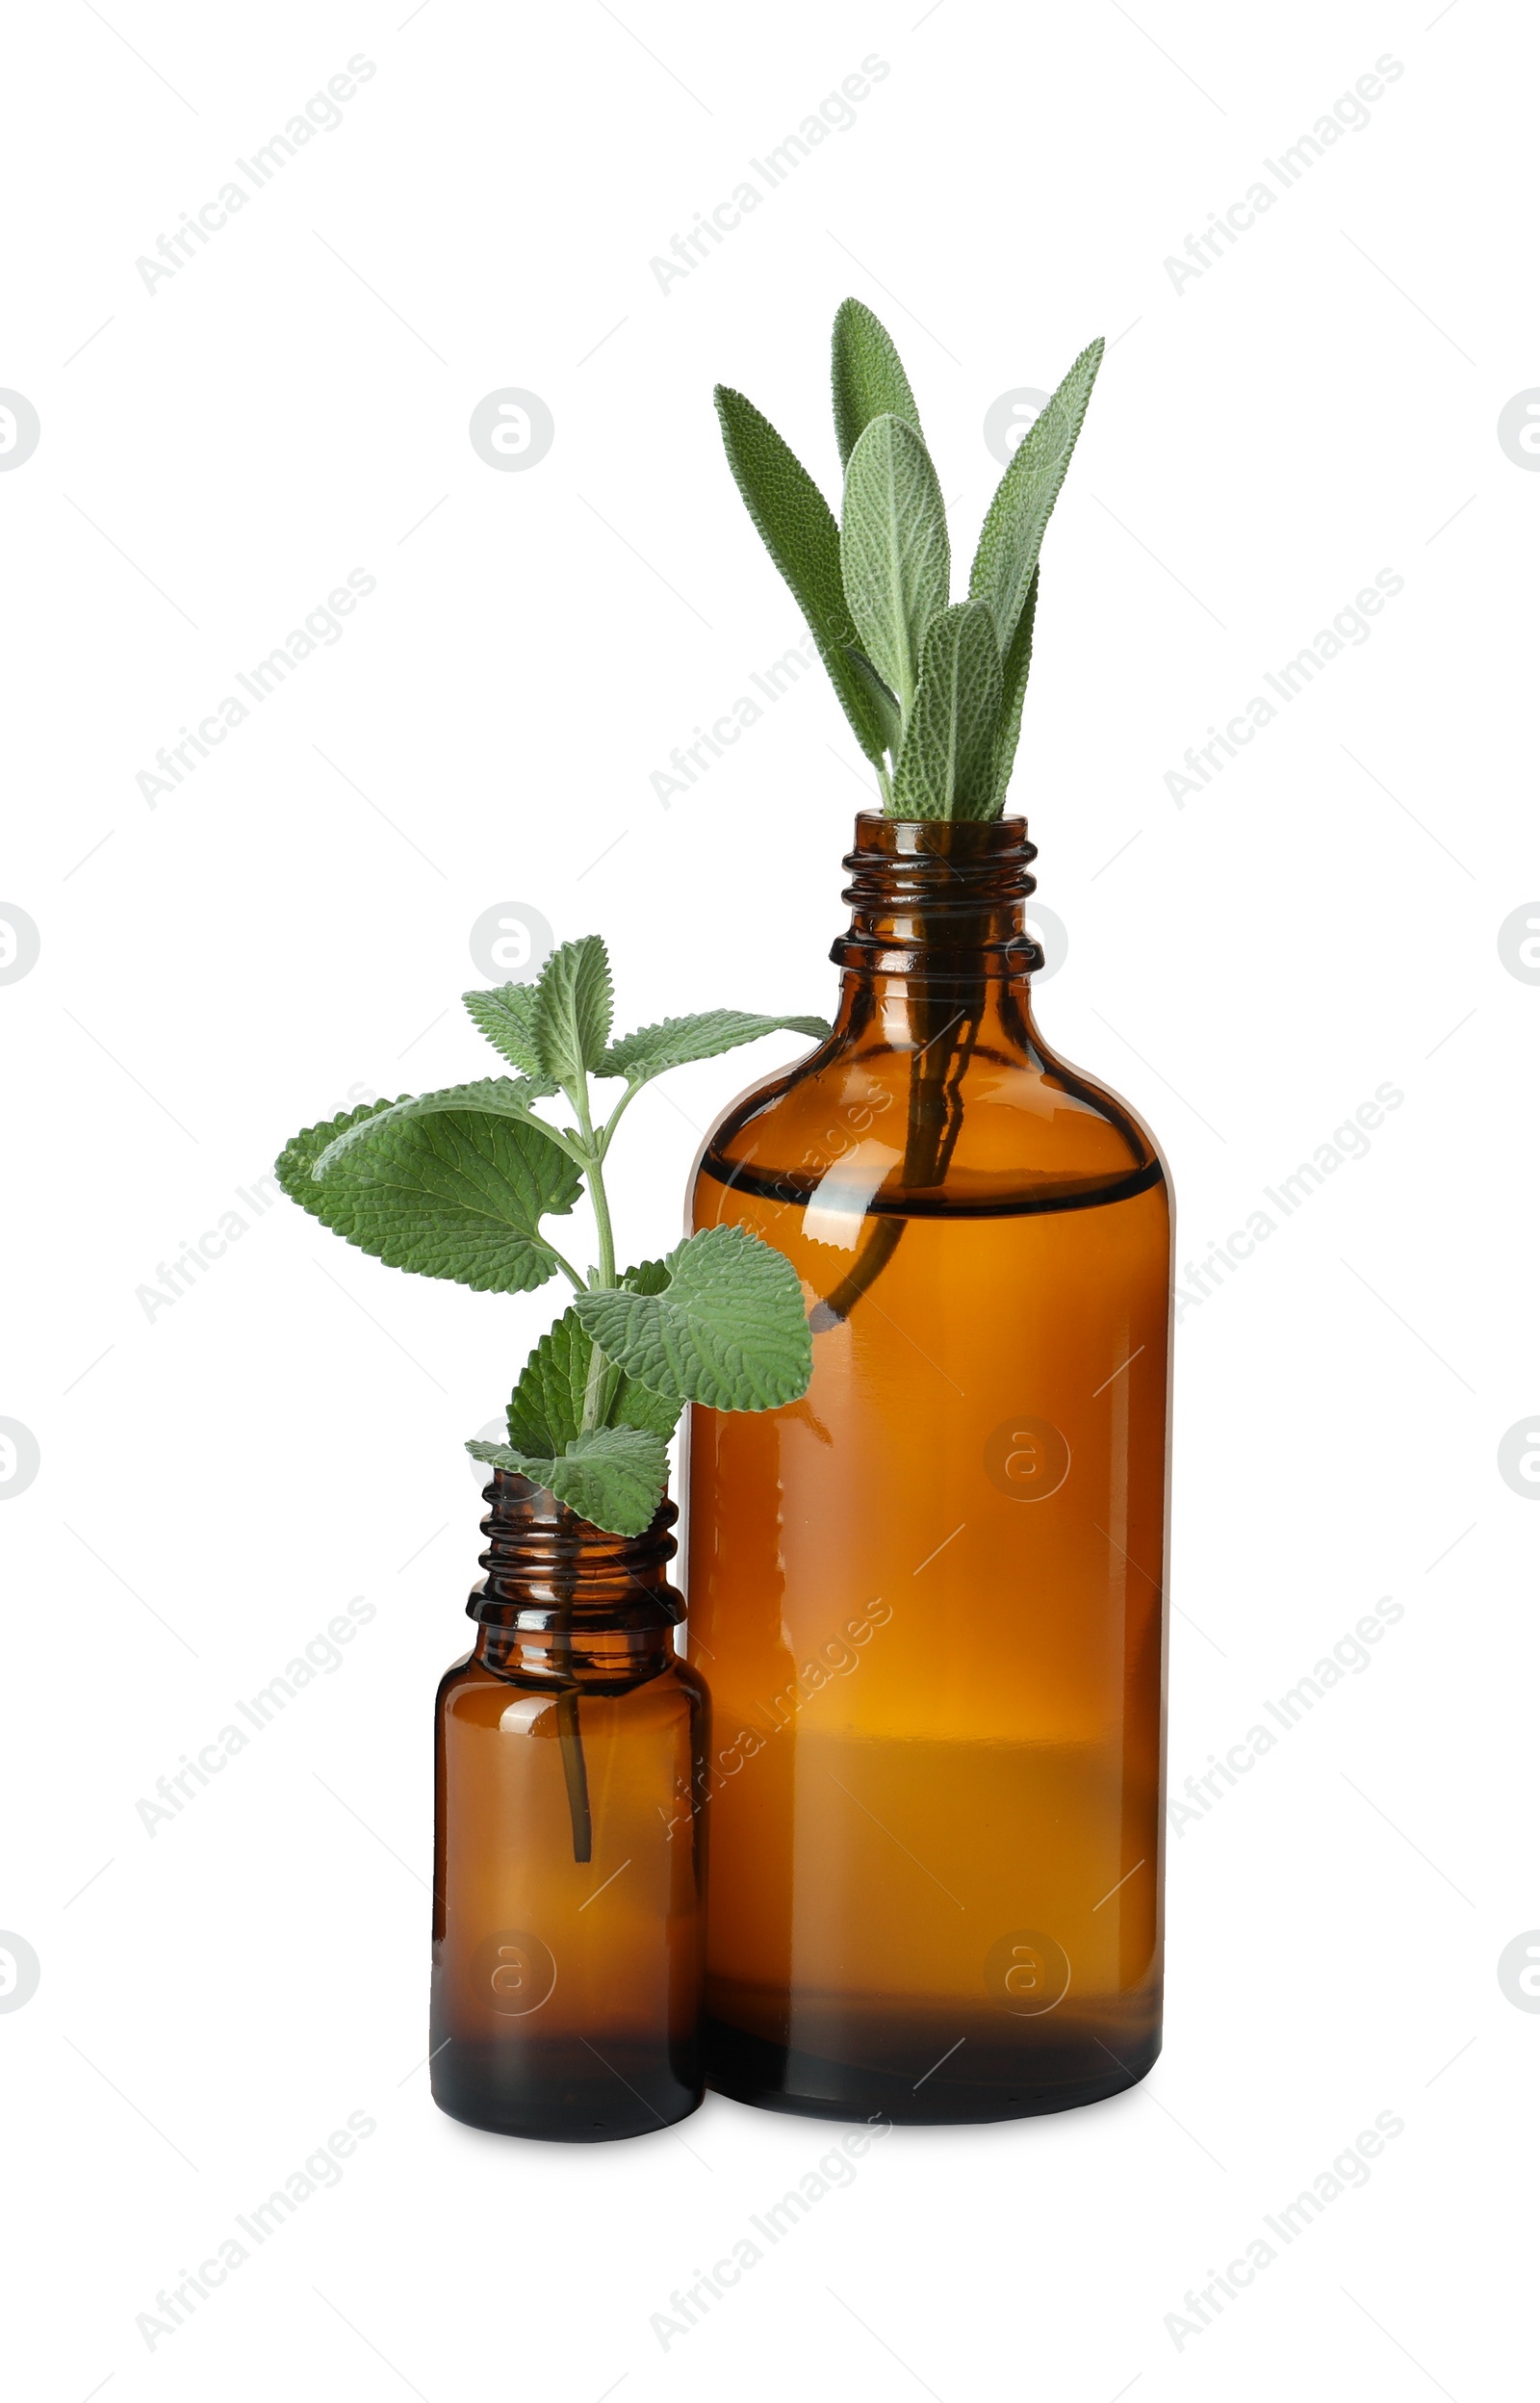 Photo of Bottle of essential oil with mint and rosemary isolated on white